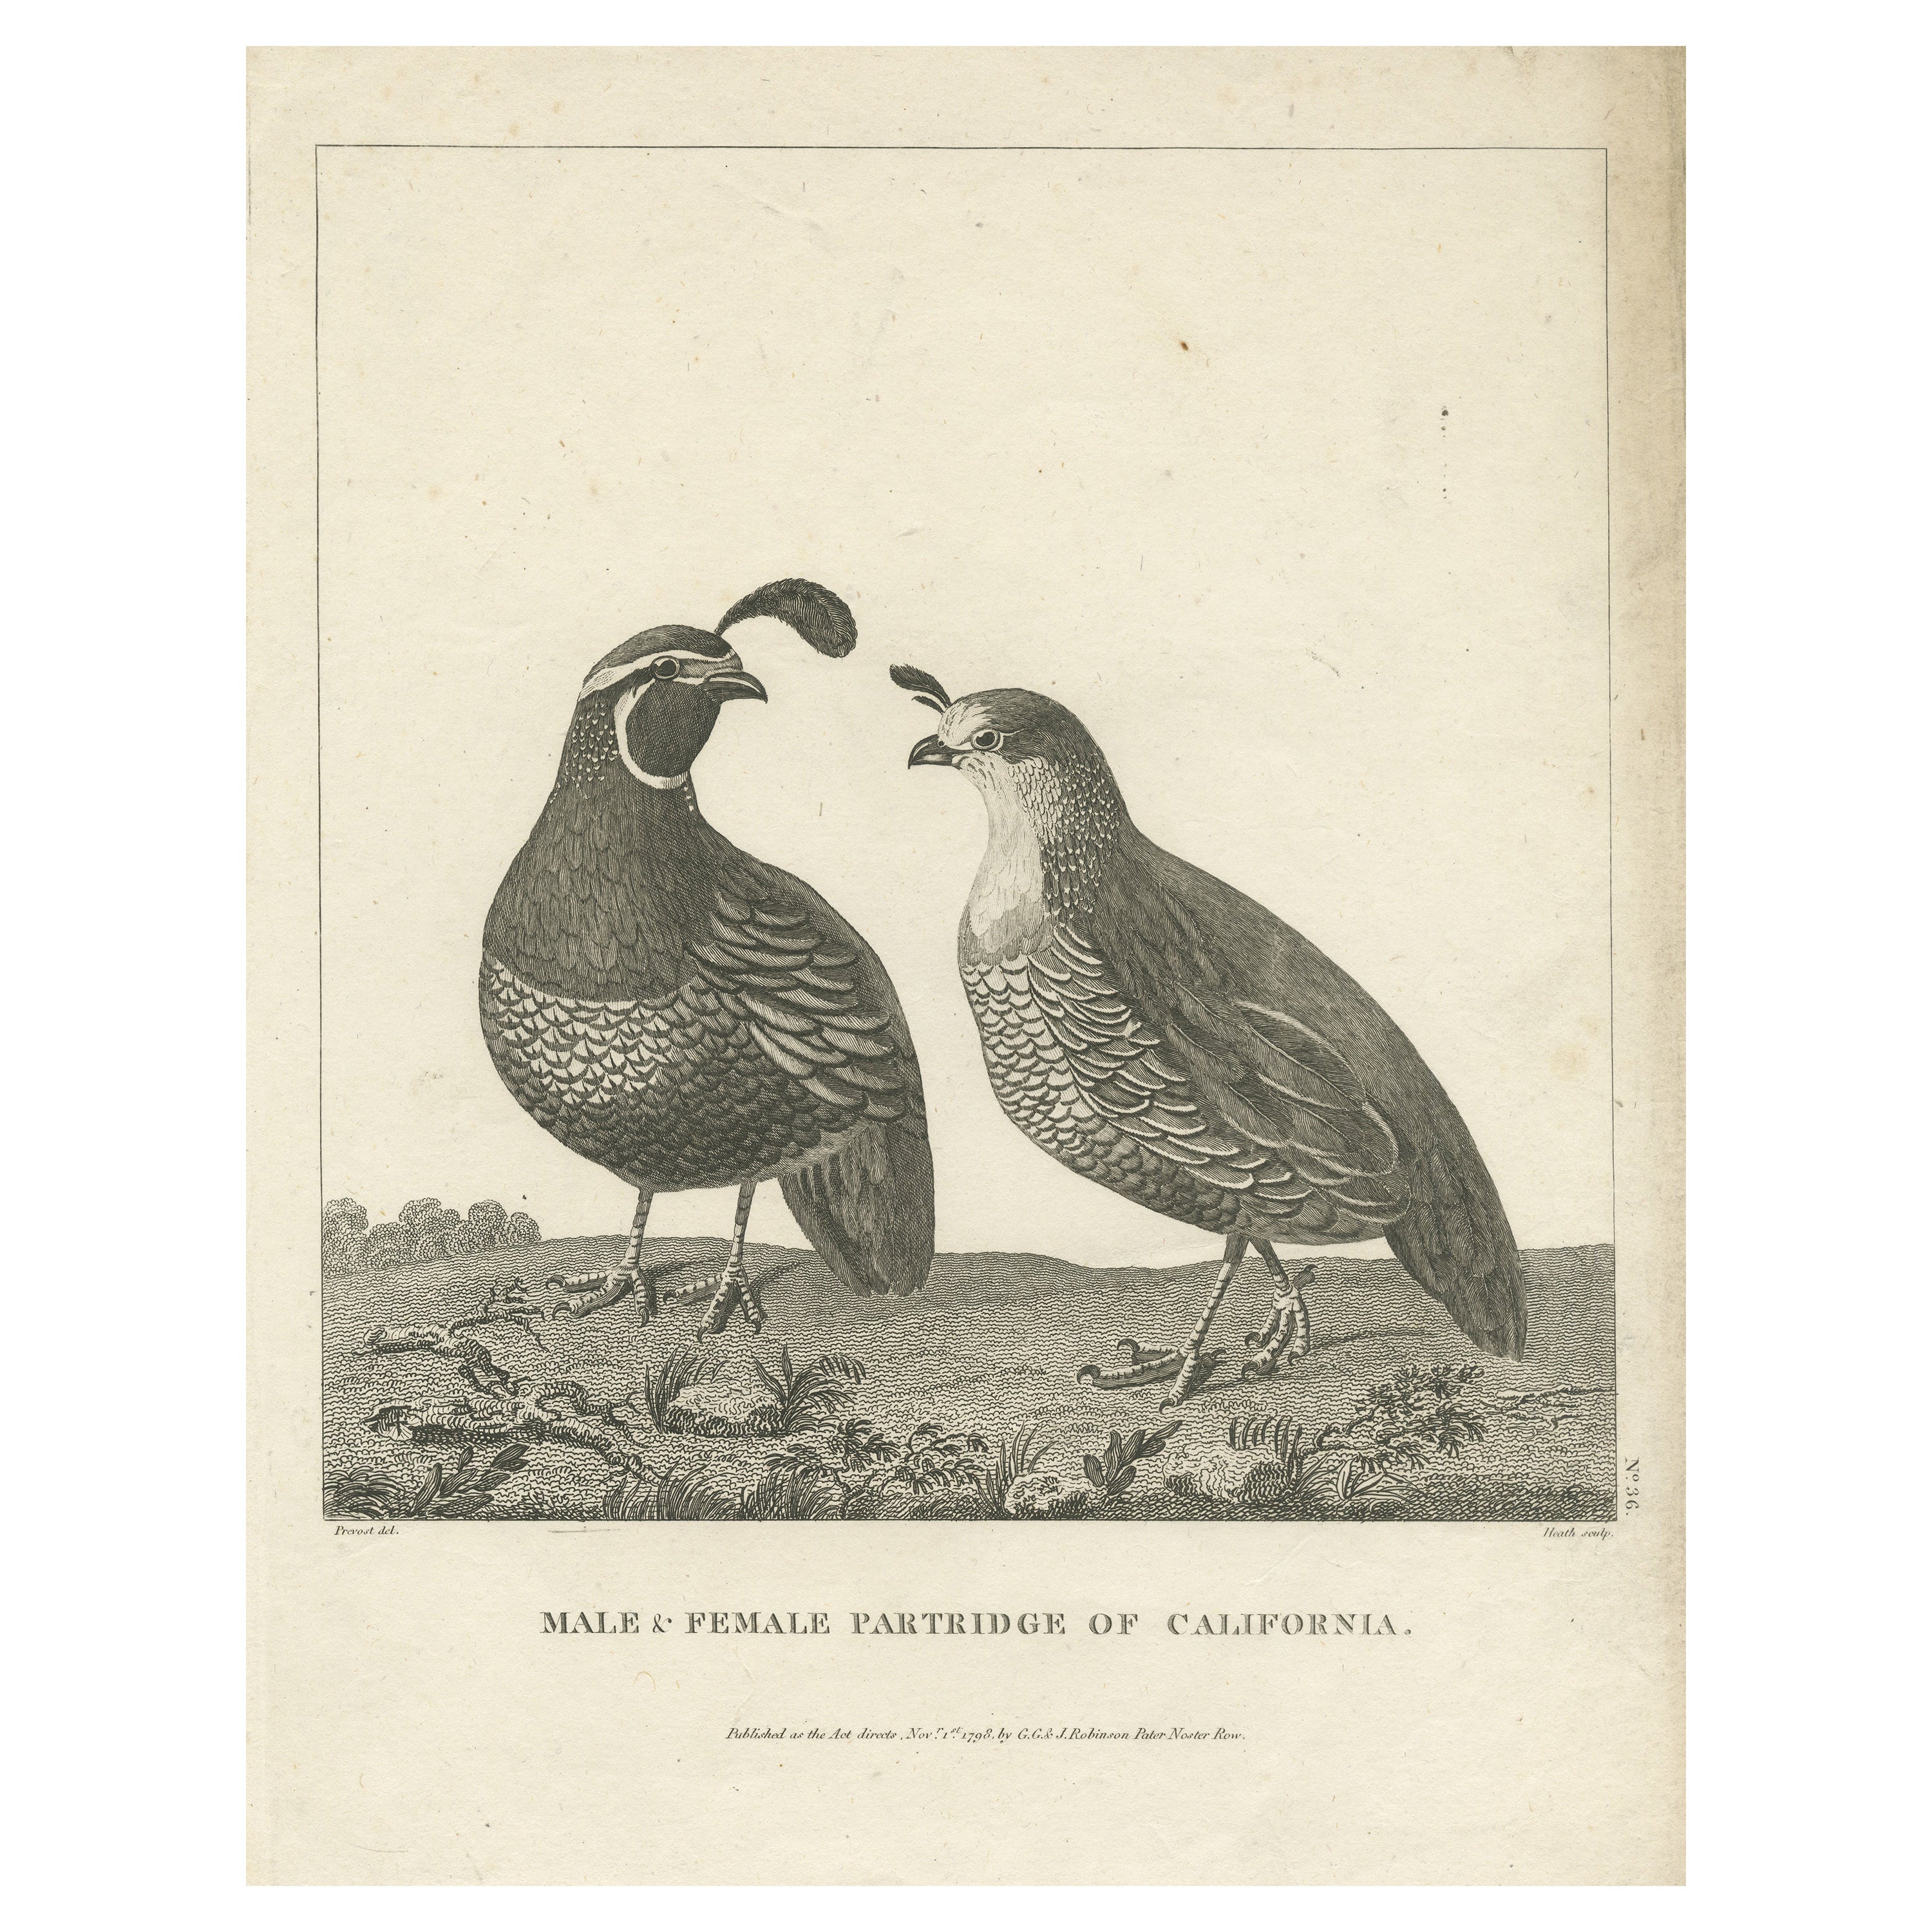 Antique Print of a Male and Female Partridge of California